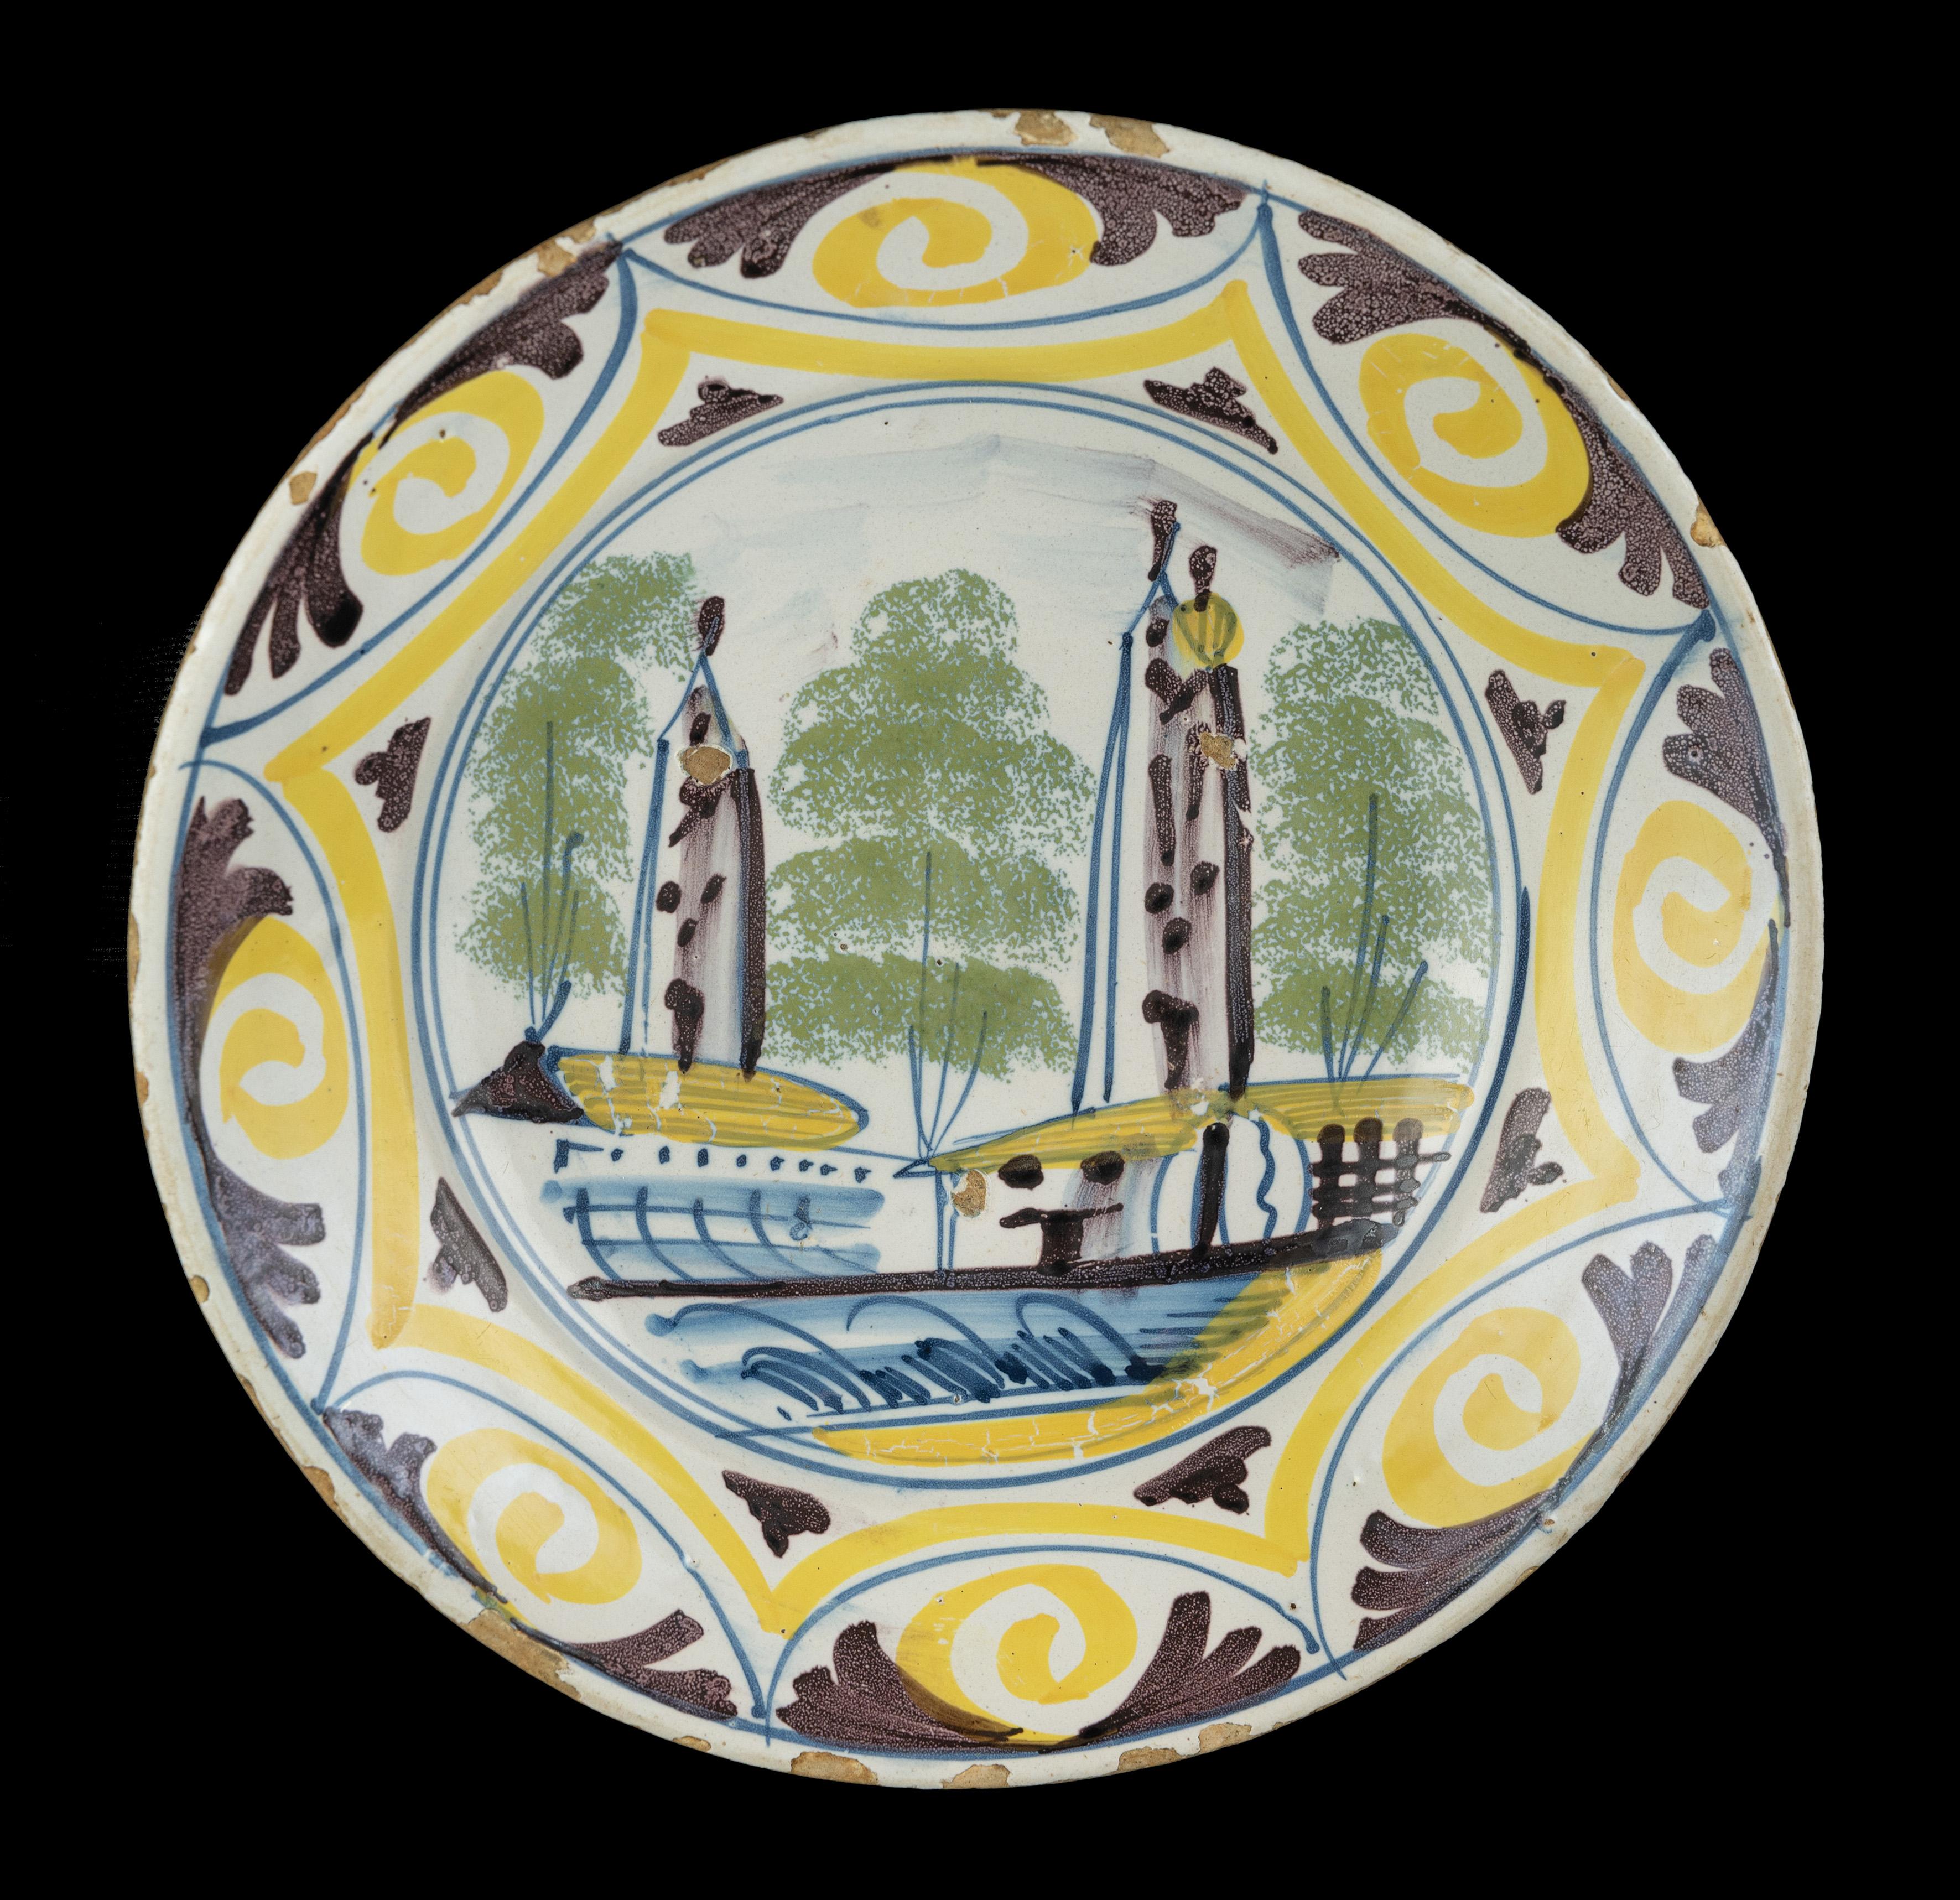 Polychrome dish with a village view. The Netherlands, 1700-1750 

The dish has a spreading, slightly raised rim and is painted in blue, purple, yellow and green with a simplified village view of two towers with houses and trees in a double circle.